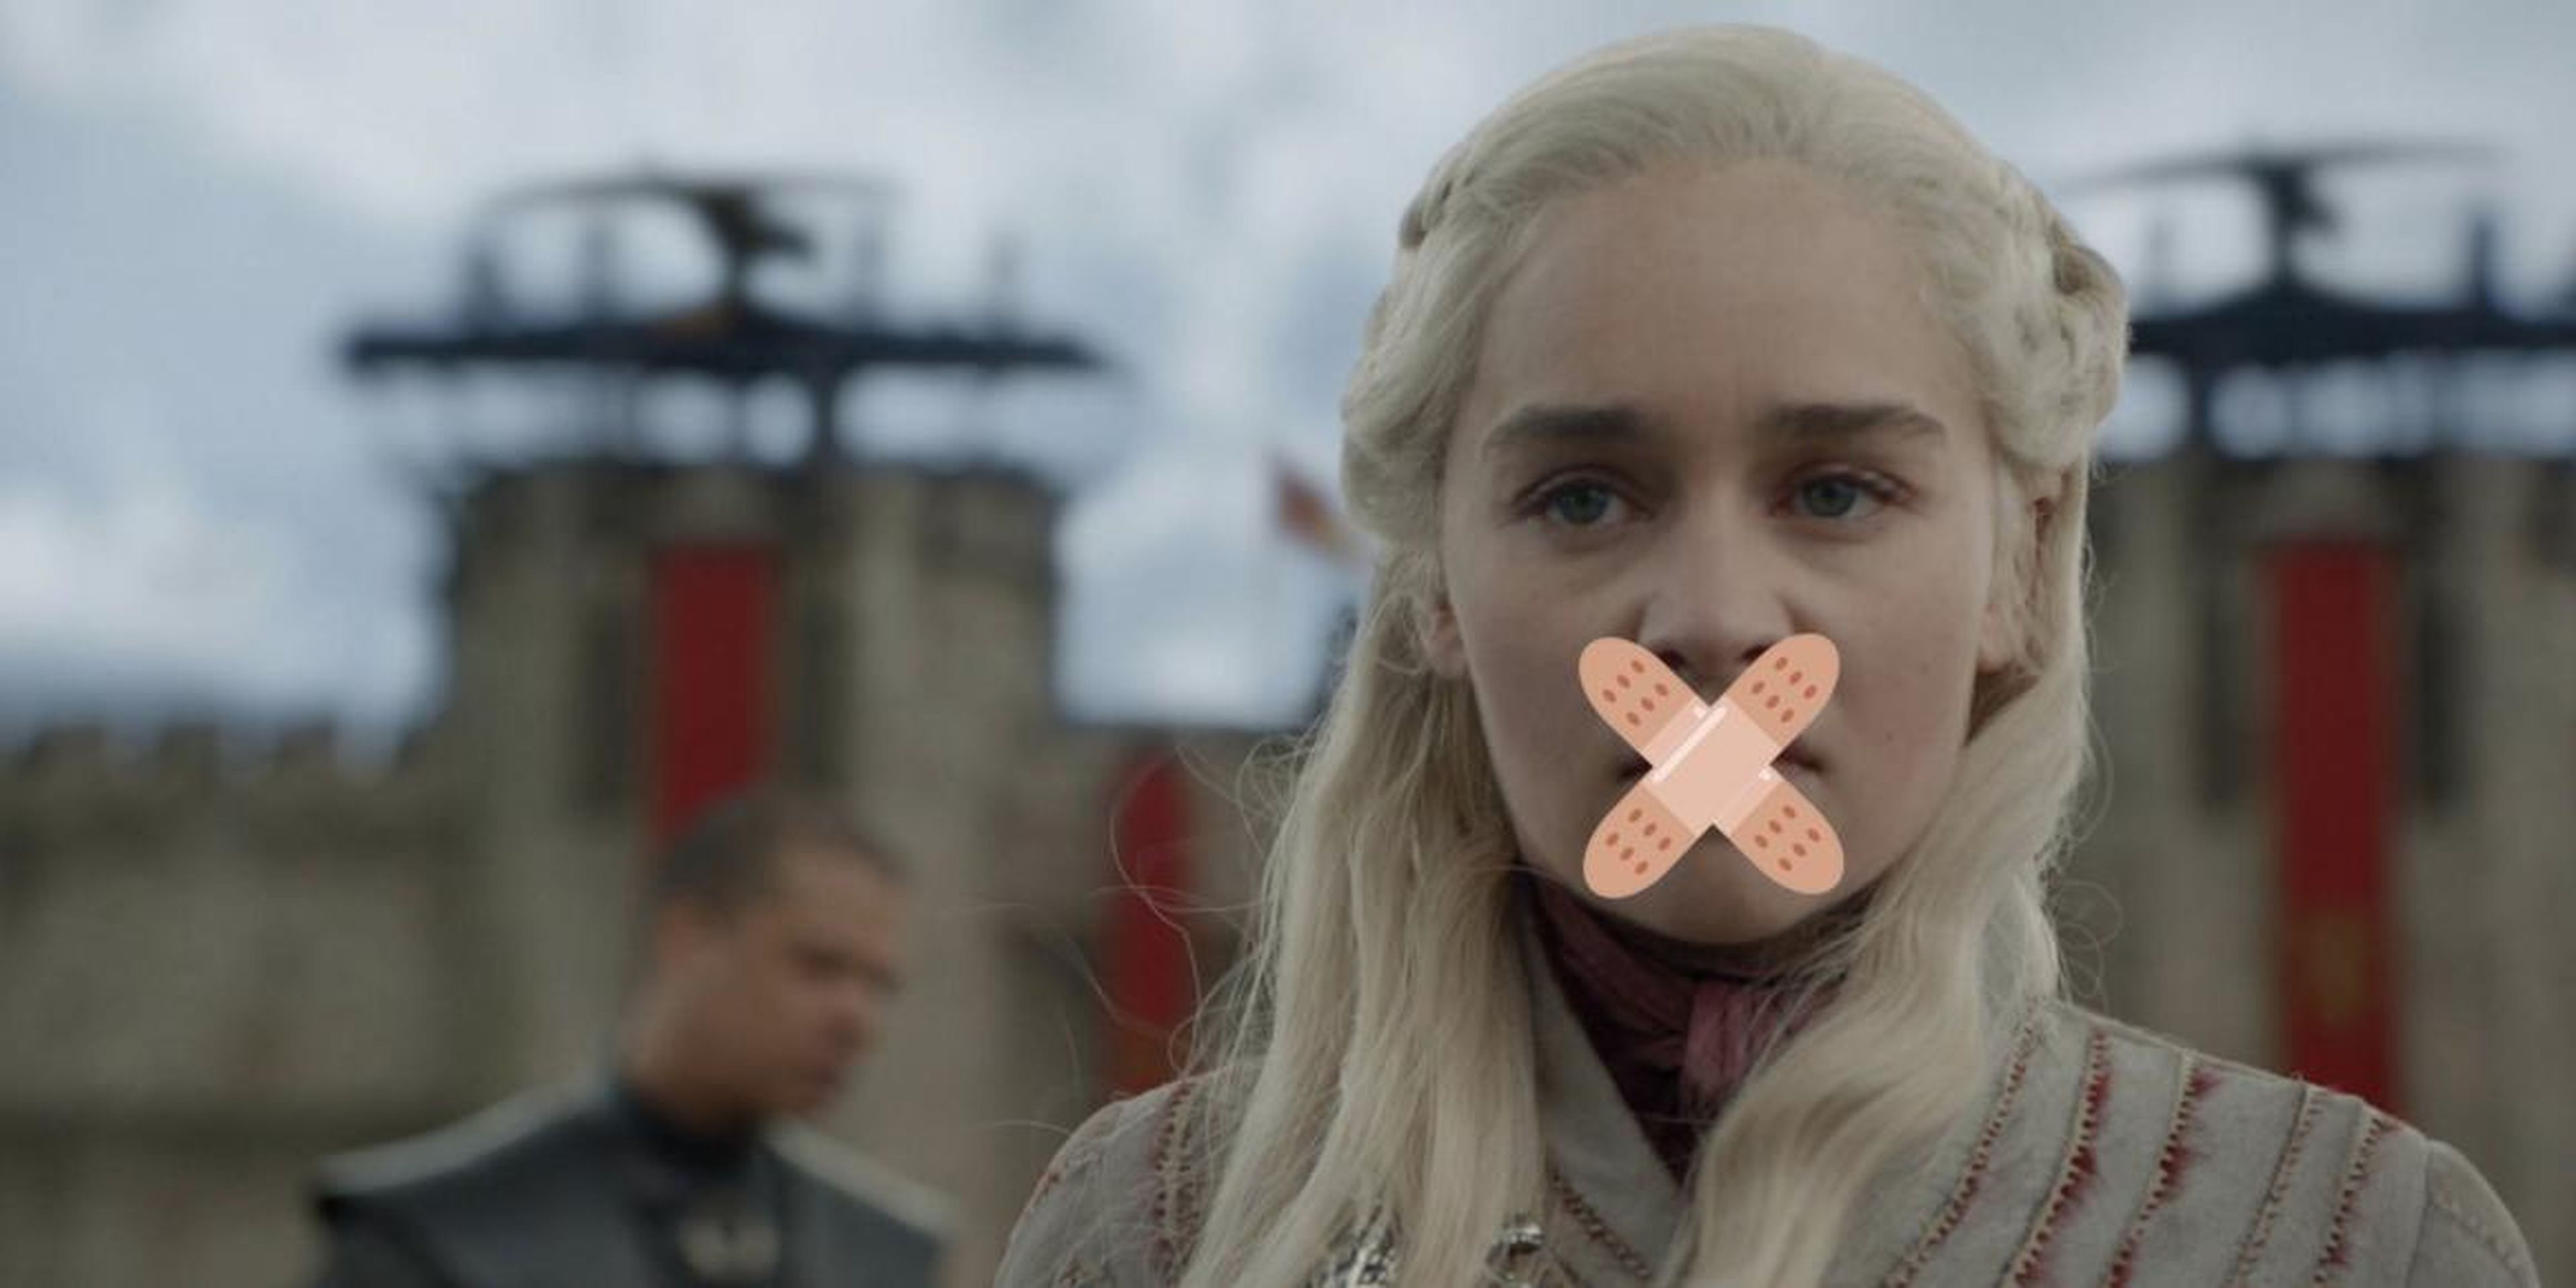 An edited image showing Daenerys Targaryen in season 8 of "Game of Thrones," with emoji plasters superimposed on her face.